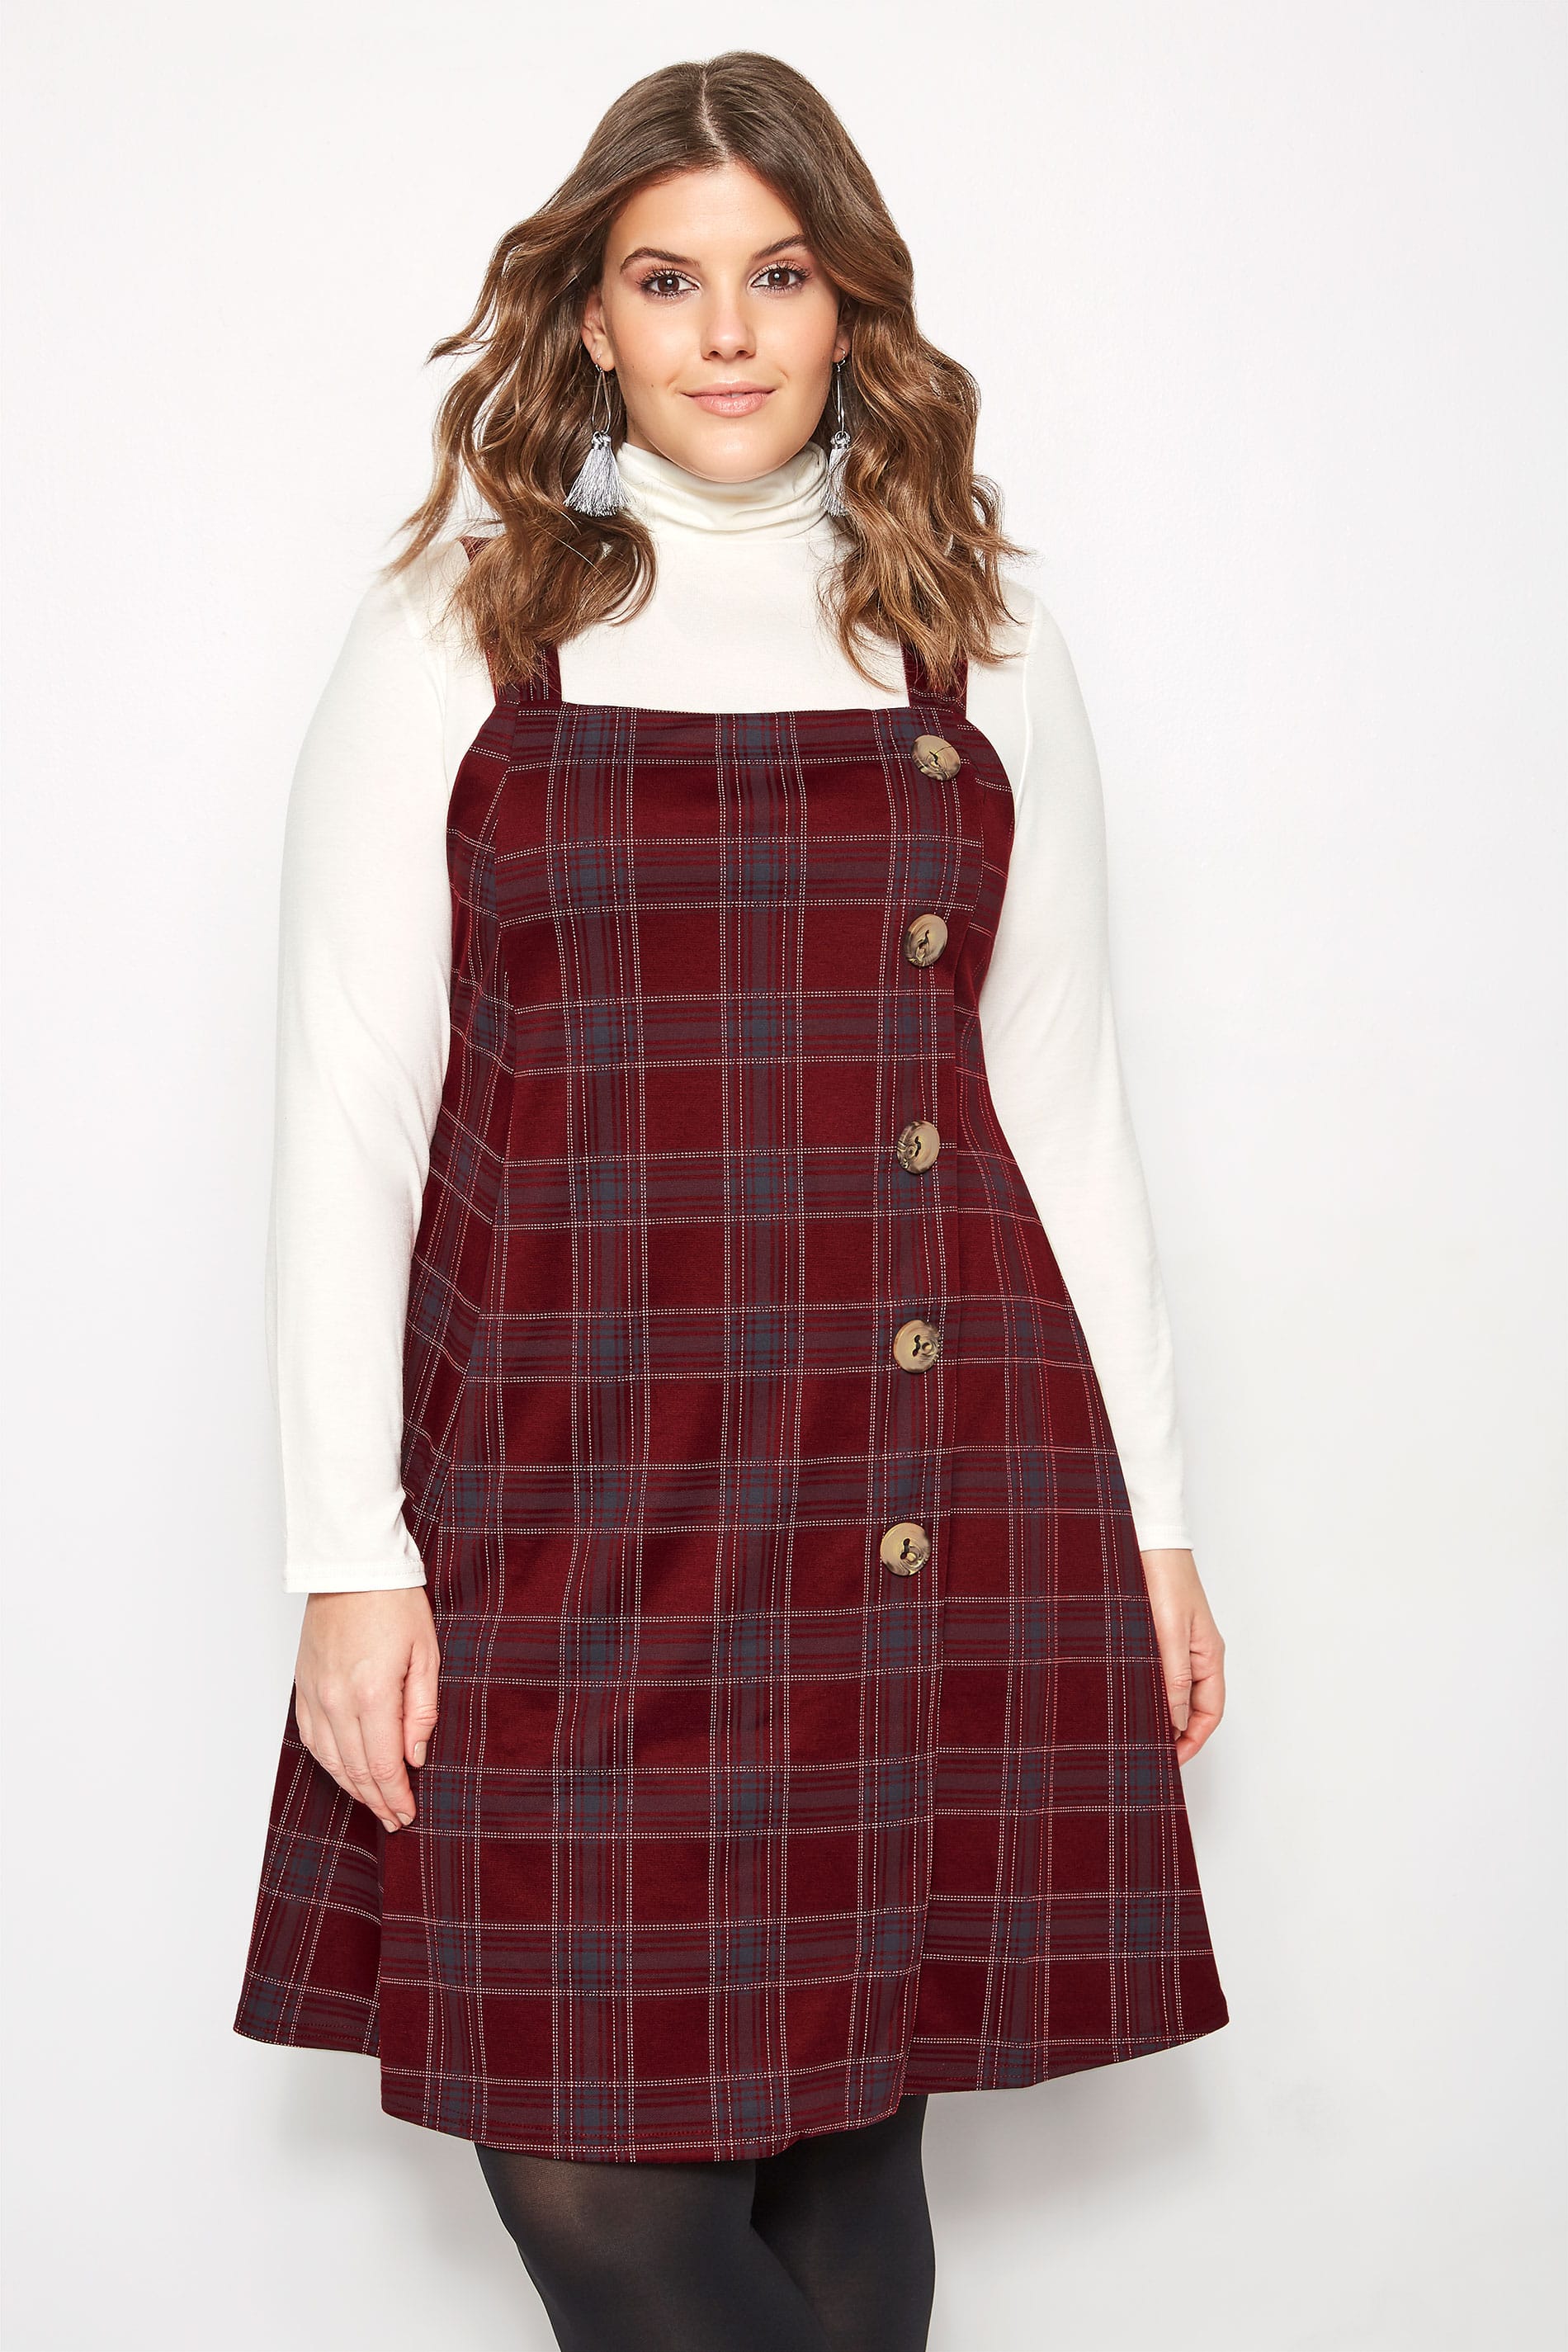 LIMITED COLLECTION Red Check Button Pinafore Dress |Plus size 16 to 32 ...